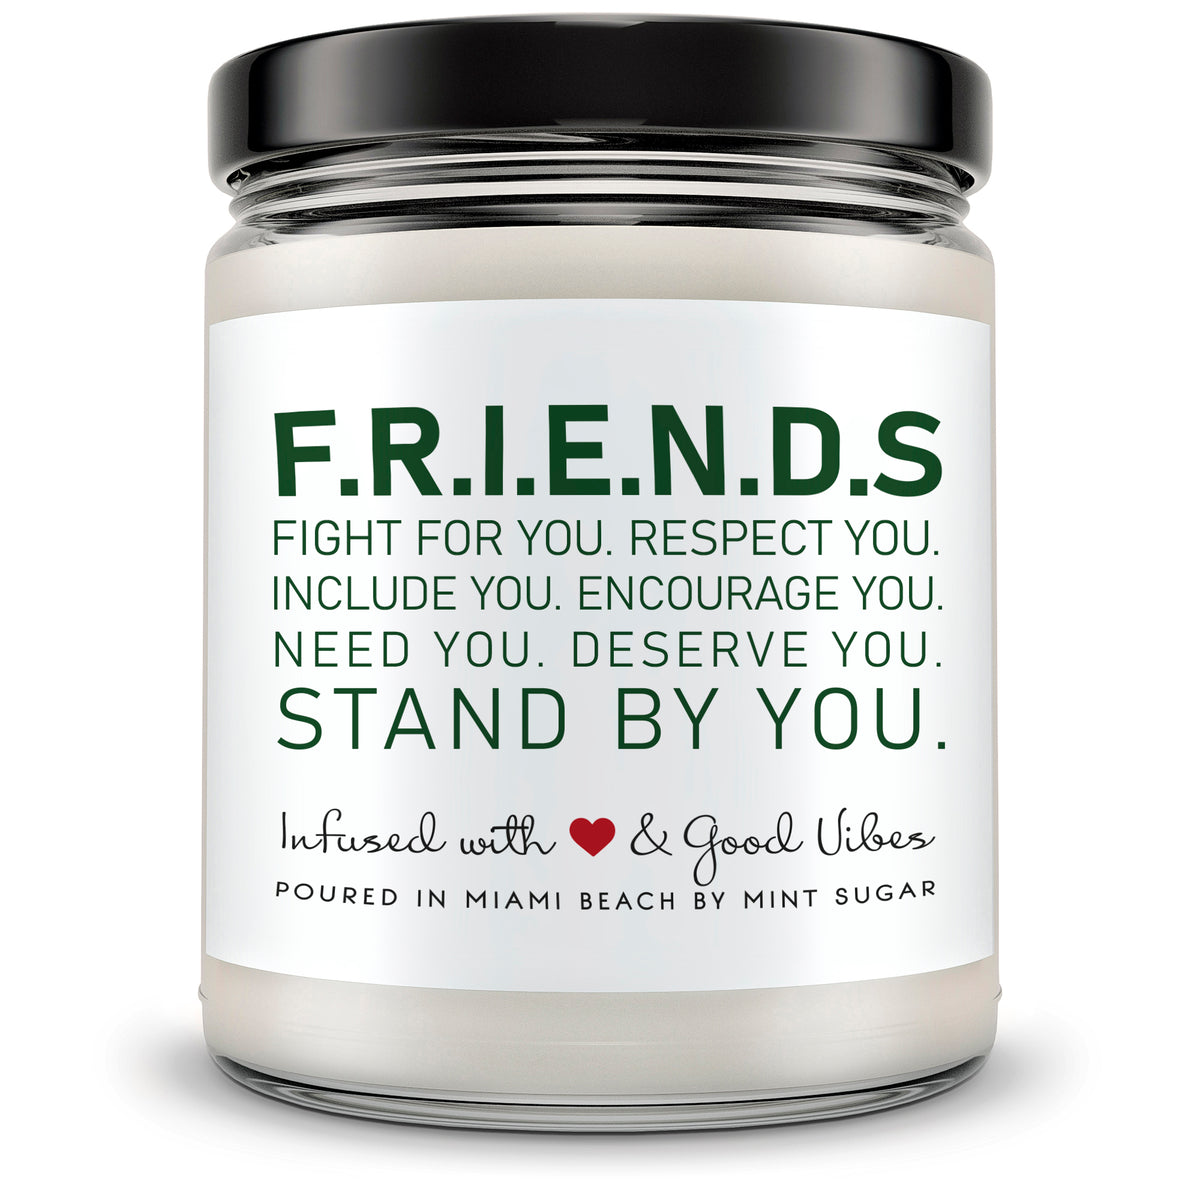 F.R.I.E.N.D.S Fight for you. Respect you. Include you. Encourage you. Need you. Deserve you. Stand by you. - Mint Sugar Candle